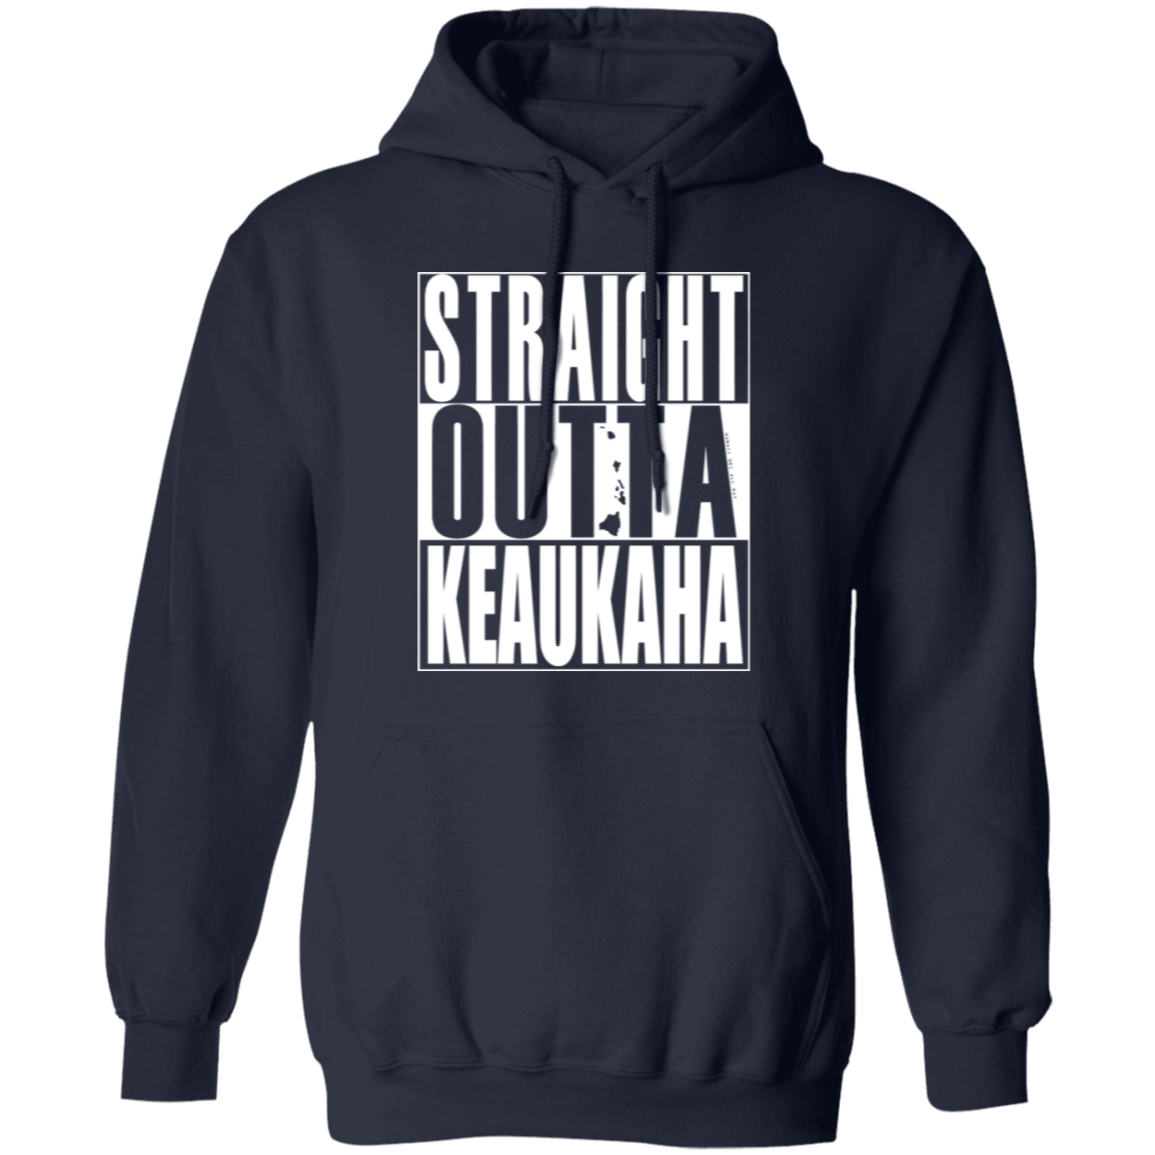 Straight Outta Keaukaha (white ink) Pullover Hoodie